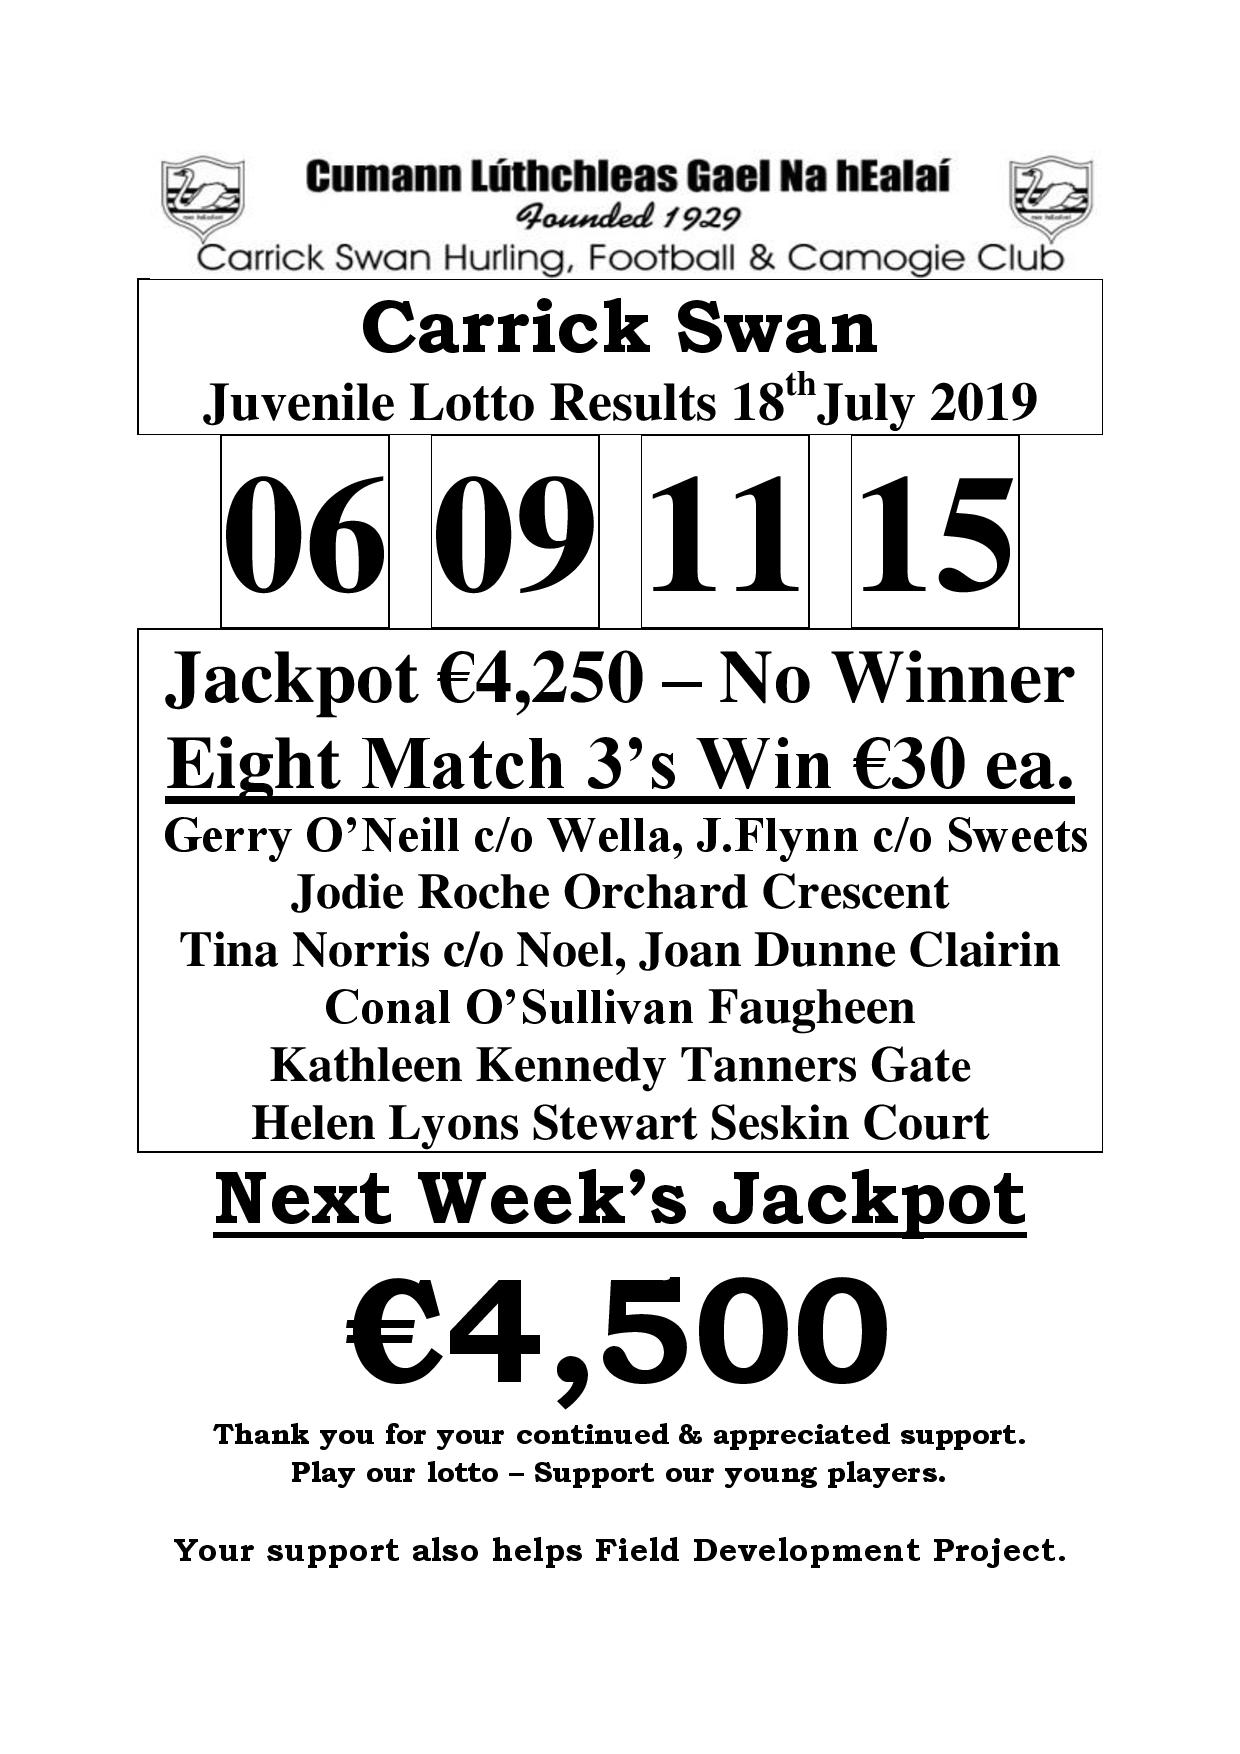 lotto result 18 july 2019